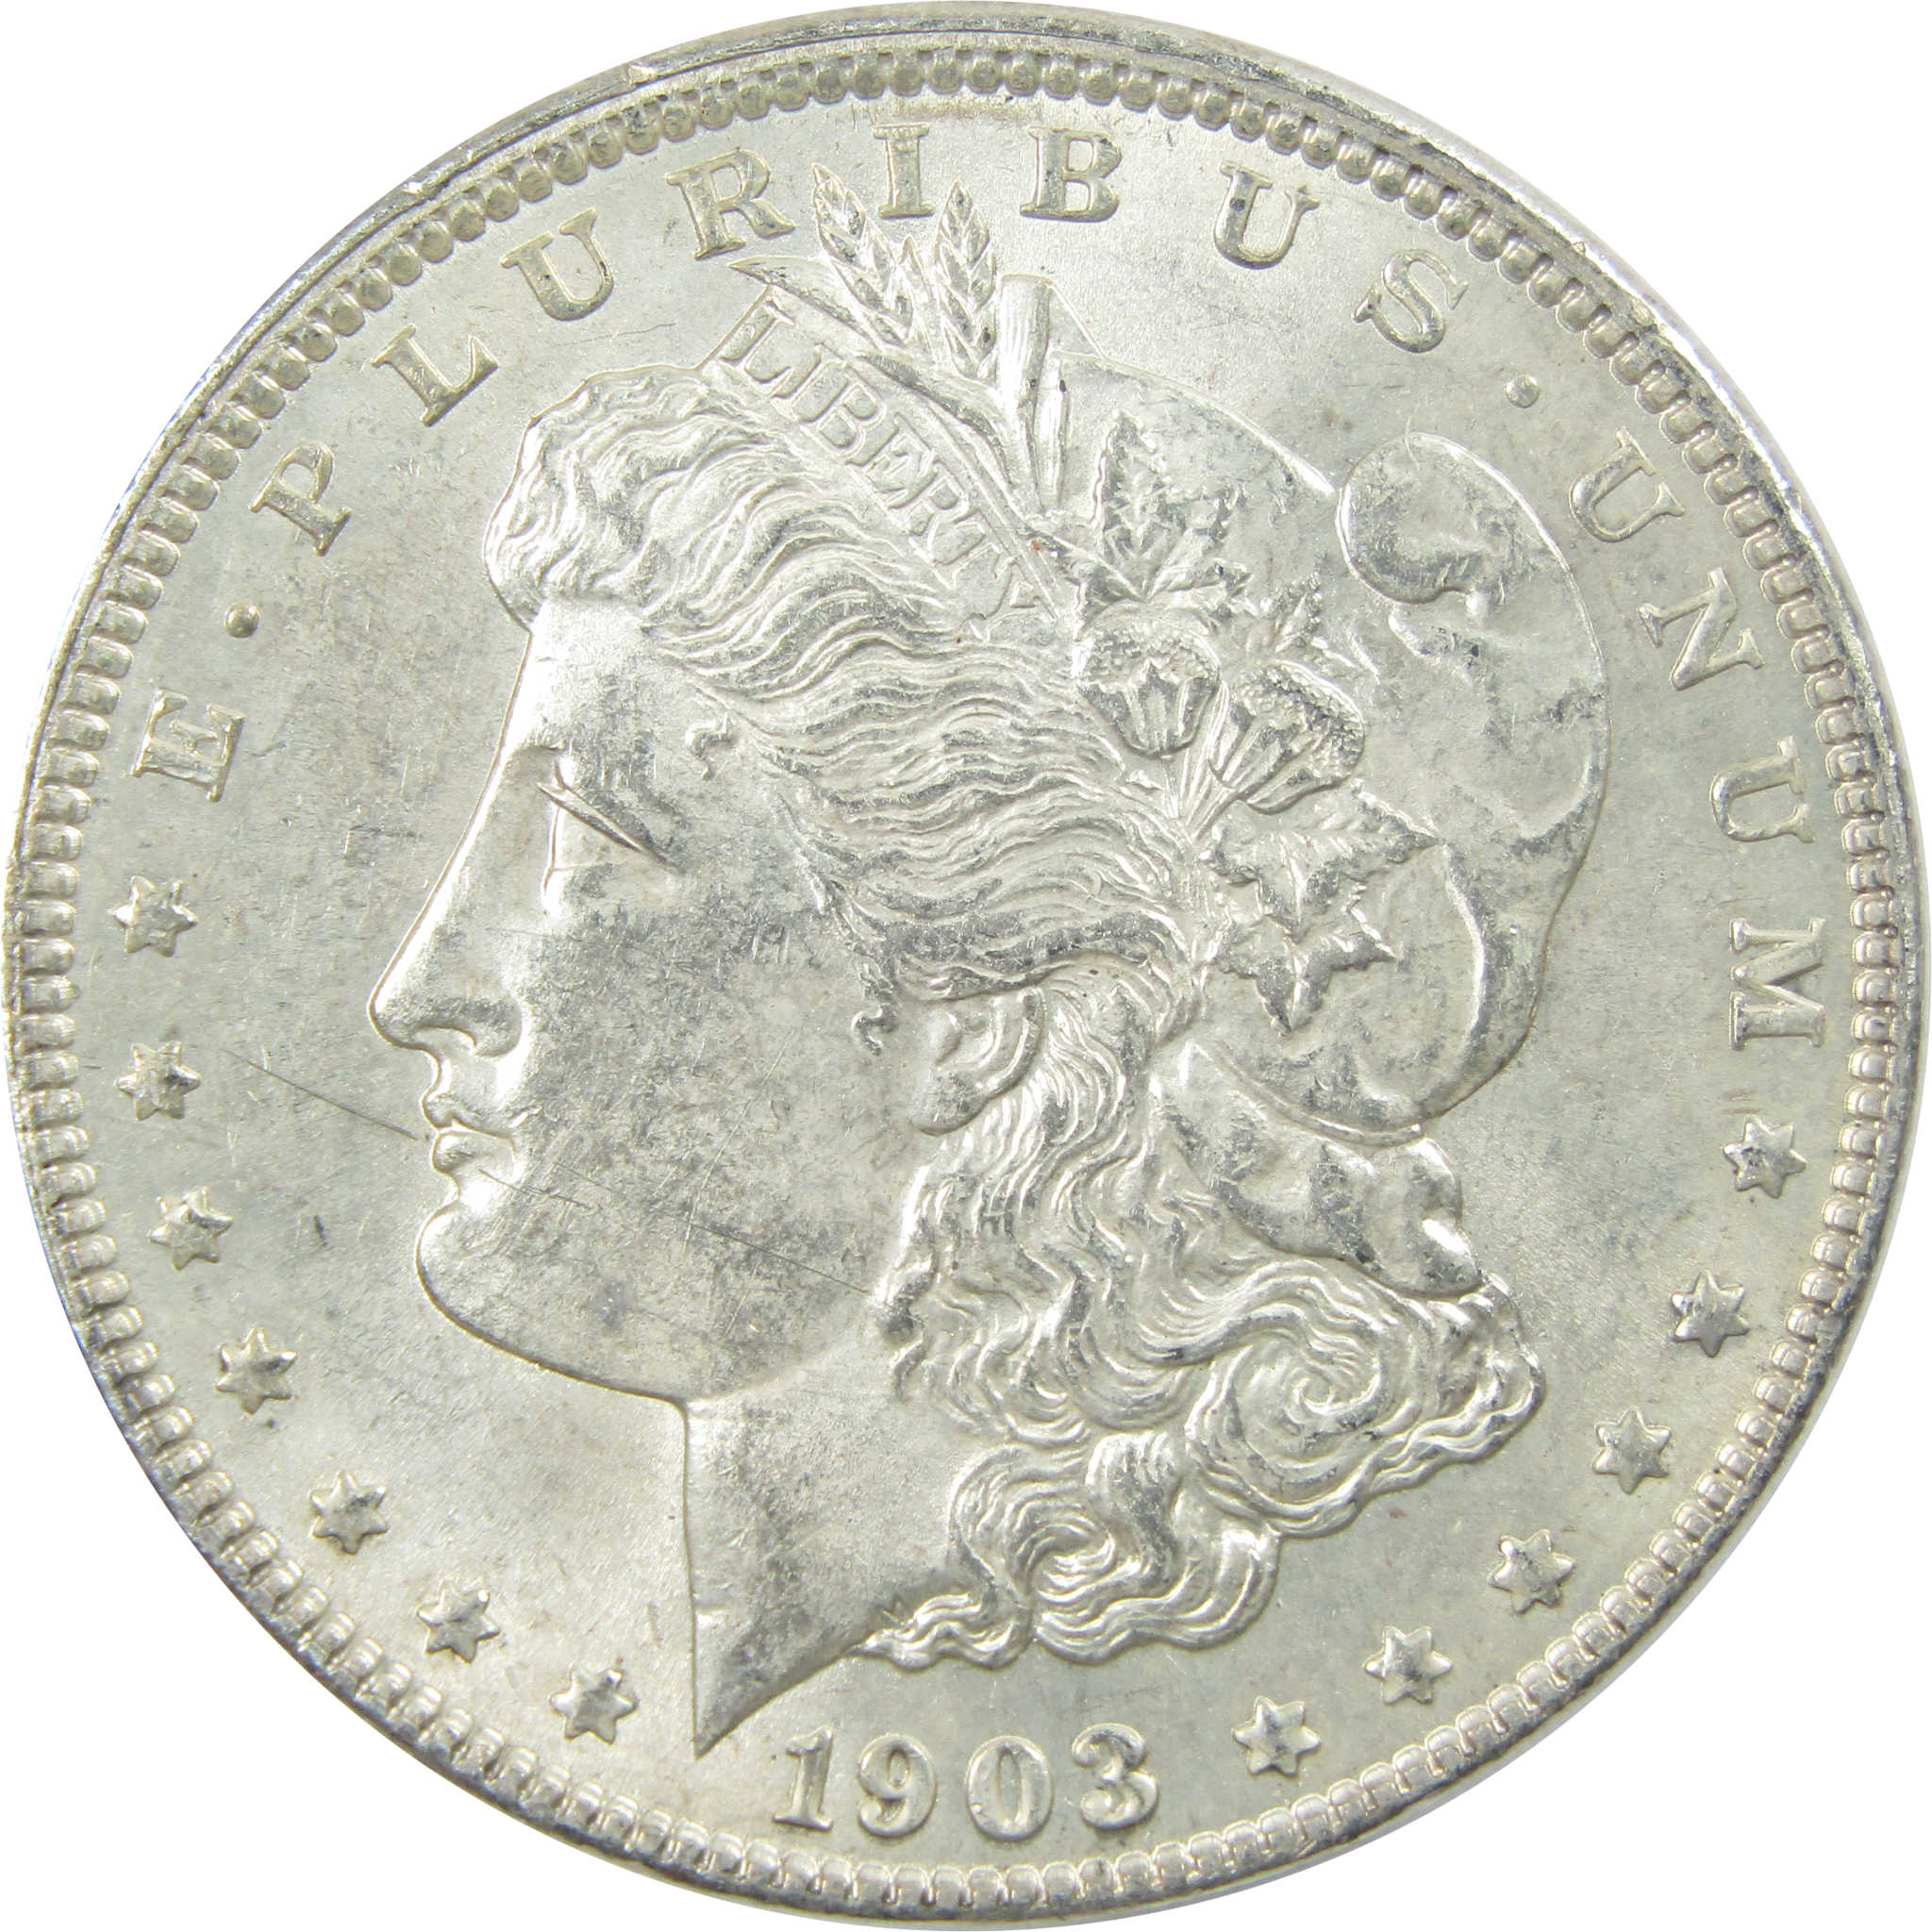 1903 Morgan Dollar AU About Uncirculated Silver $1 Coin SKU:I13631 - Morgan coin - Morgan silver dollar - Morgan silver dollar for sale - Profile Coins &amp; Collectibles